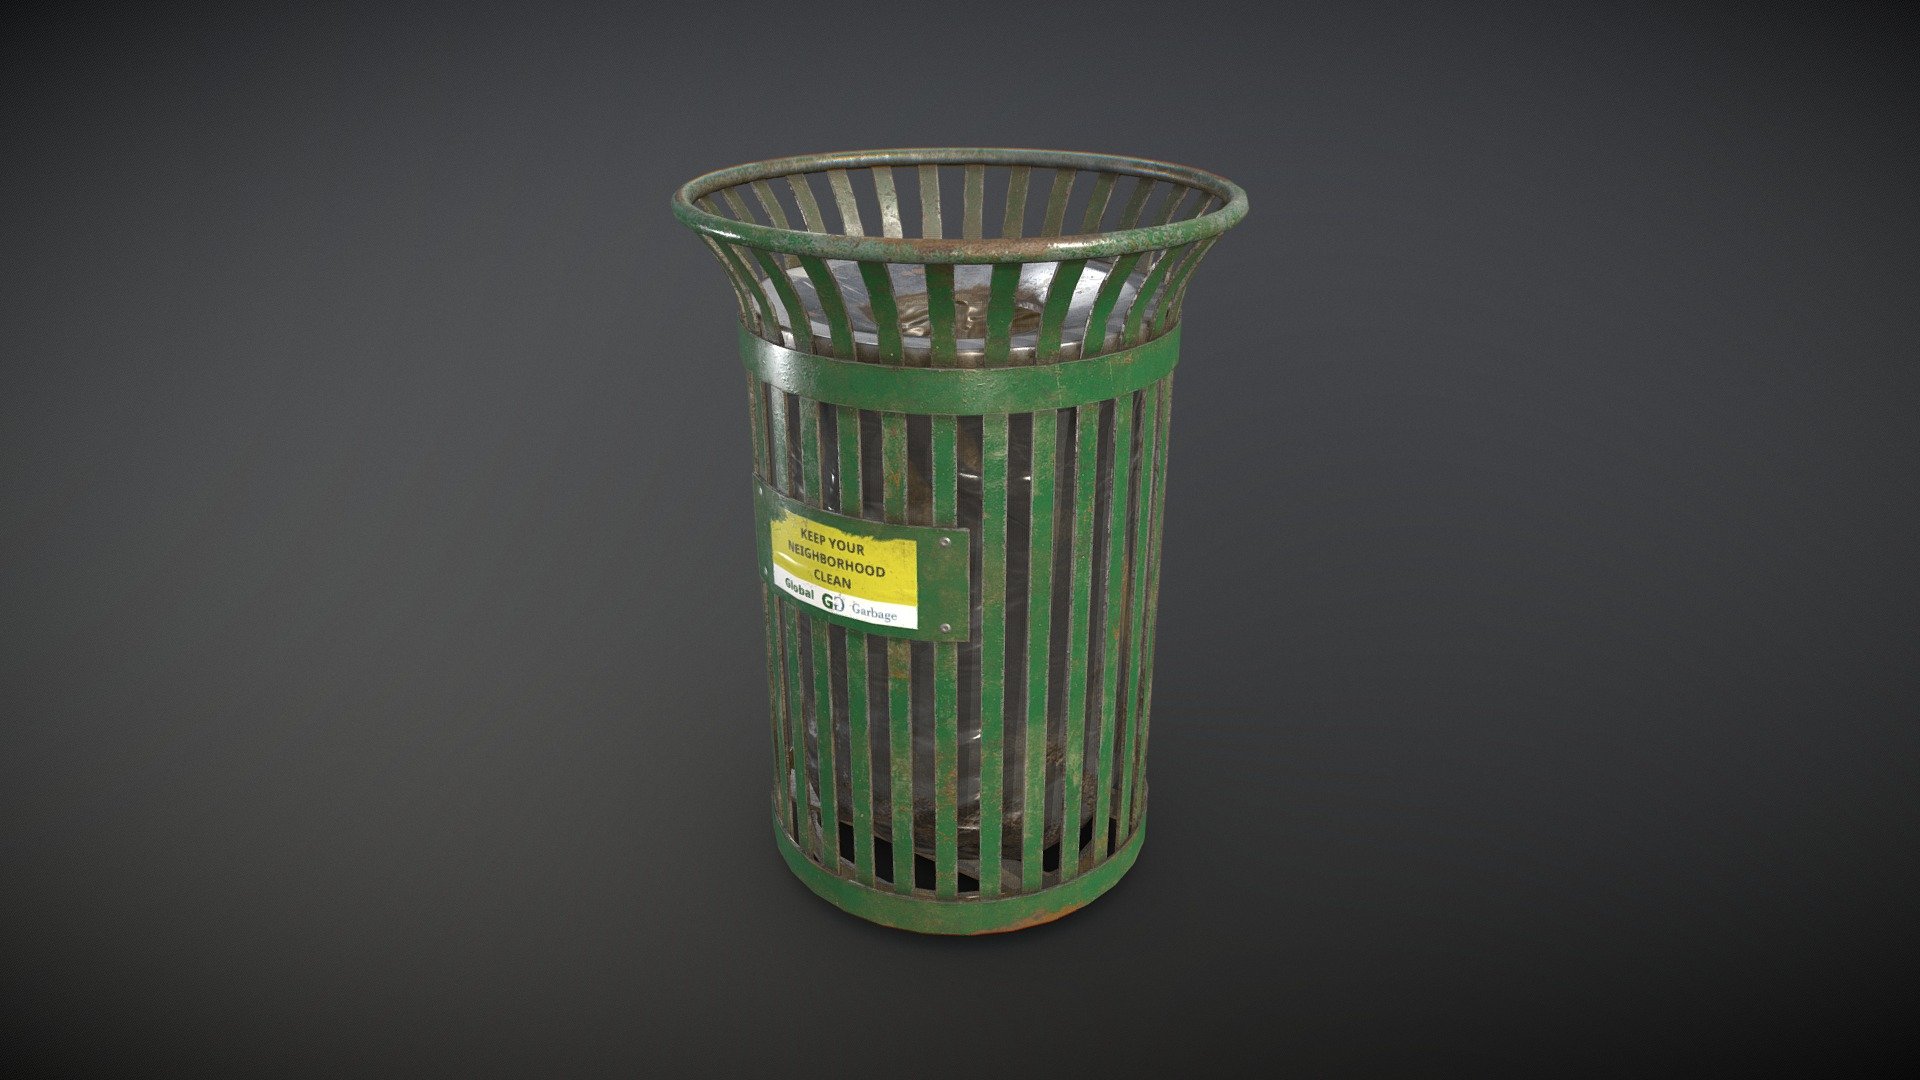 Low Poly Waste Bin 3D model with 2 PBR texture sets (clean and diry):


Real-world scale and centered.
The unit of measurement used for the model is centimeters
Polys: 1274 (Converted to triangles: 2.548)
Textured in Substance Painter
All branding and labels are custom made.
PBR material with 2048x2048 textures.
Texel density is approx. 1024.

Provided Maps (cleand and dirty):


Albedo
Normal
Roughness
Metalness
AO

Formats Incuded - MAX / BLEND / OBJ / FBX

This model can be used for any game, film, personal project, etc. You may not resell or redistribute any content - Waste Bin - Low Poly - Buy Royalty Free 3D model by MSWoodvine 3d model